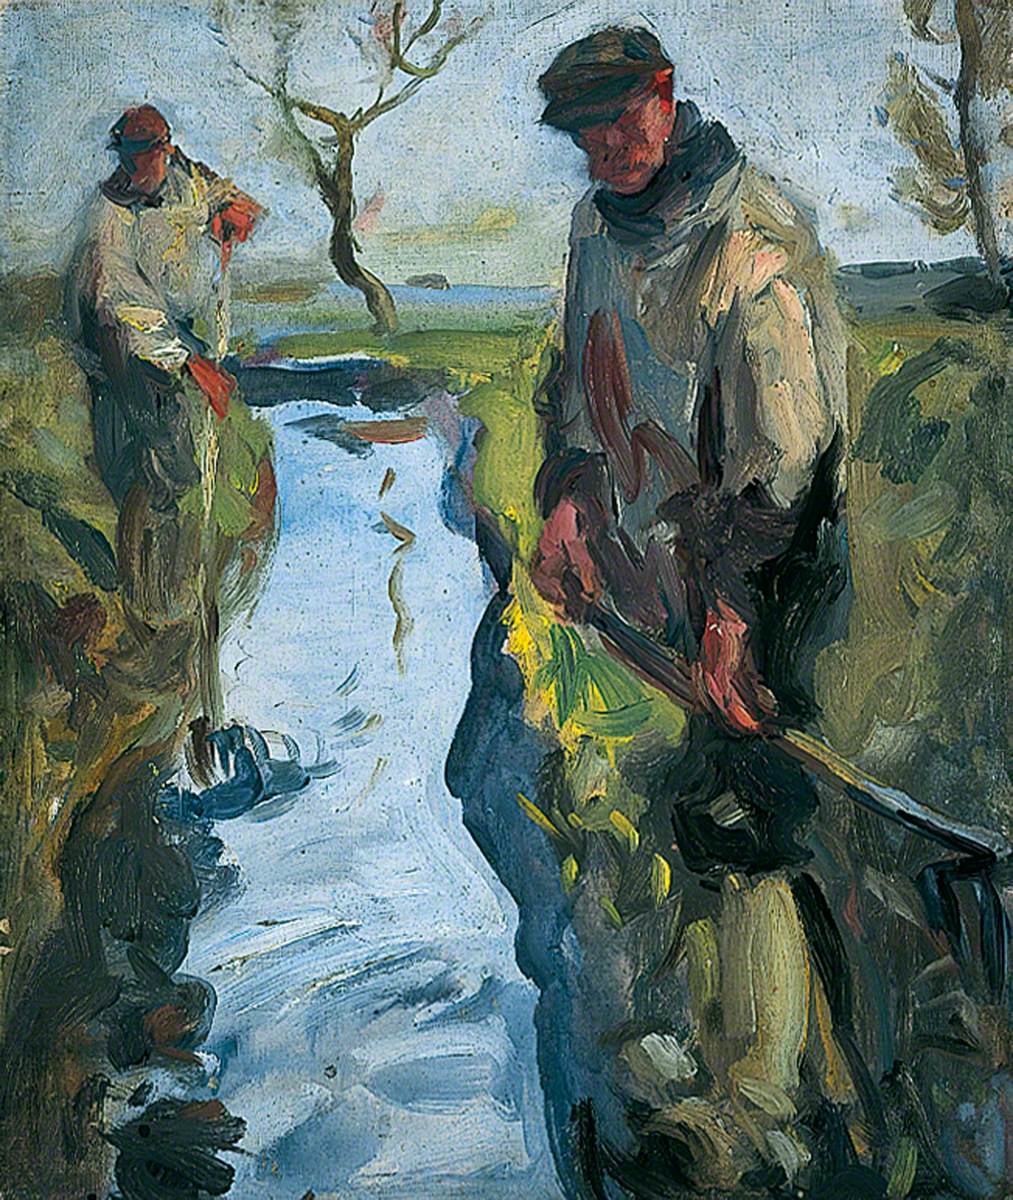 Two Men Clearing Banks